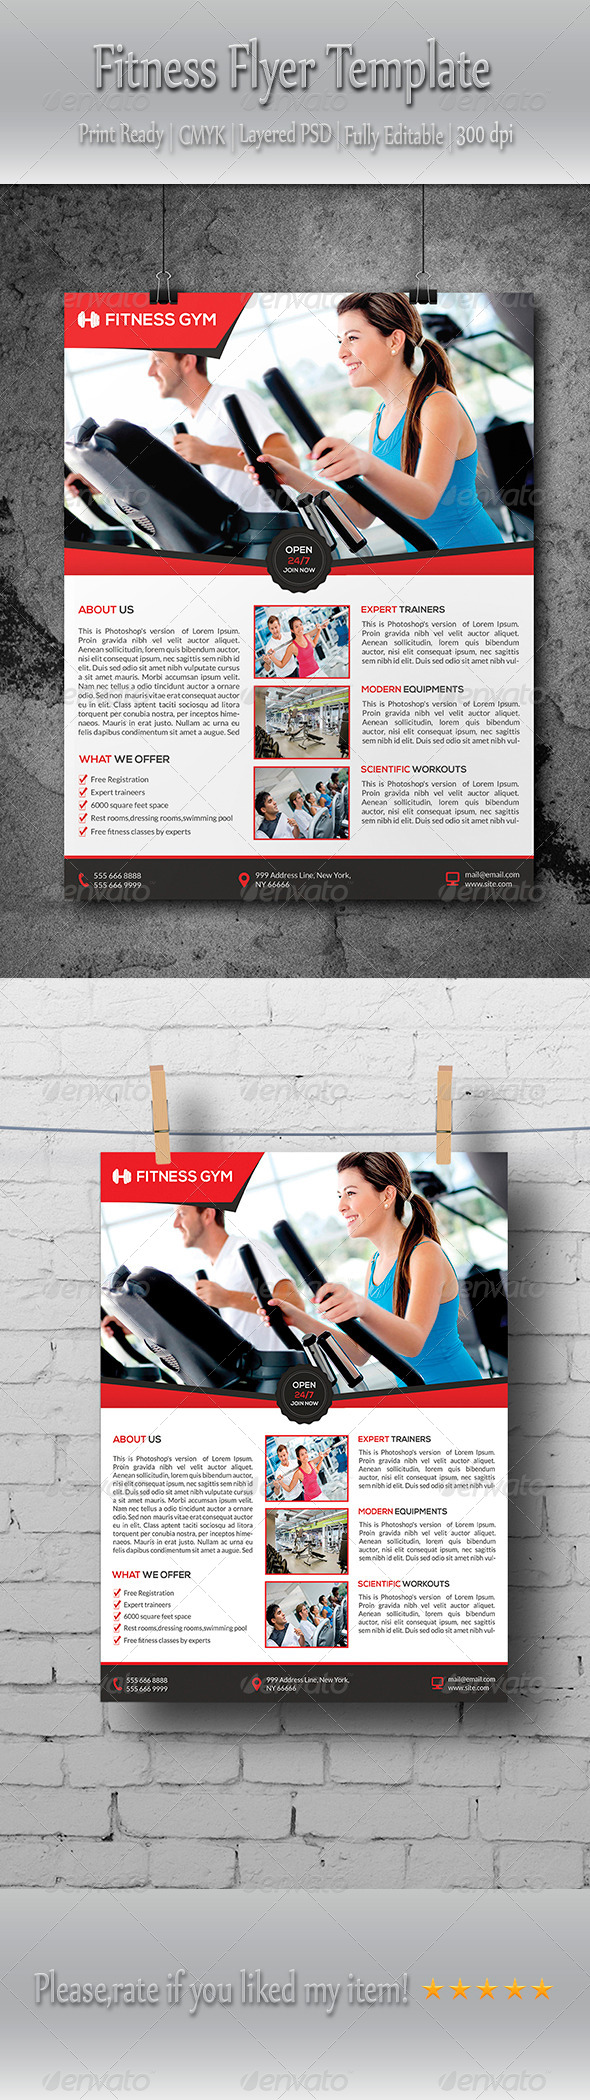 Fitness Gym Flyer Template By Elitely Graphicriver